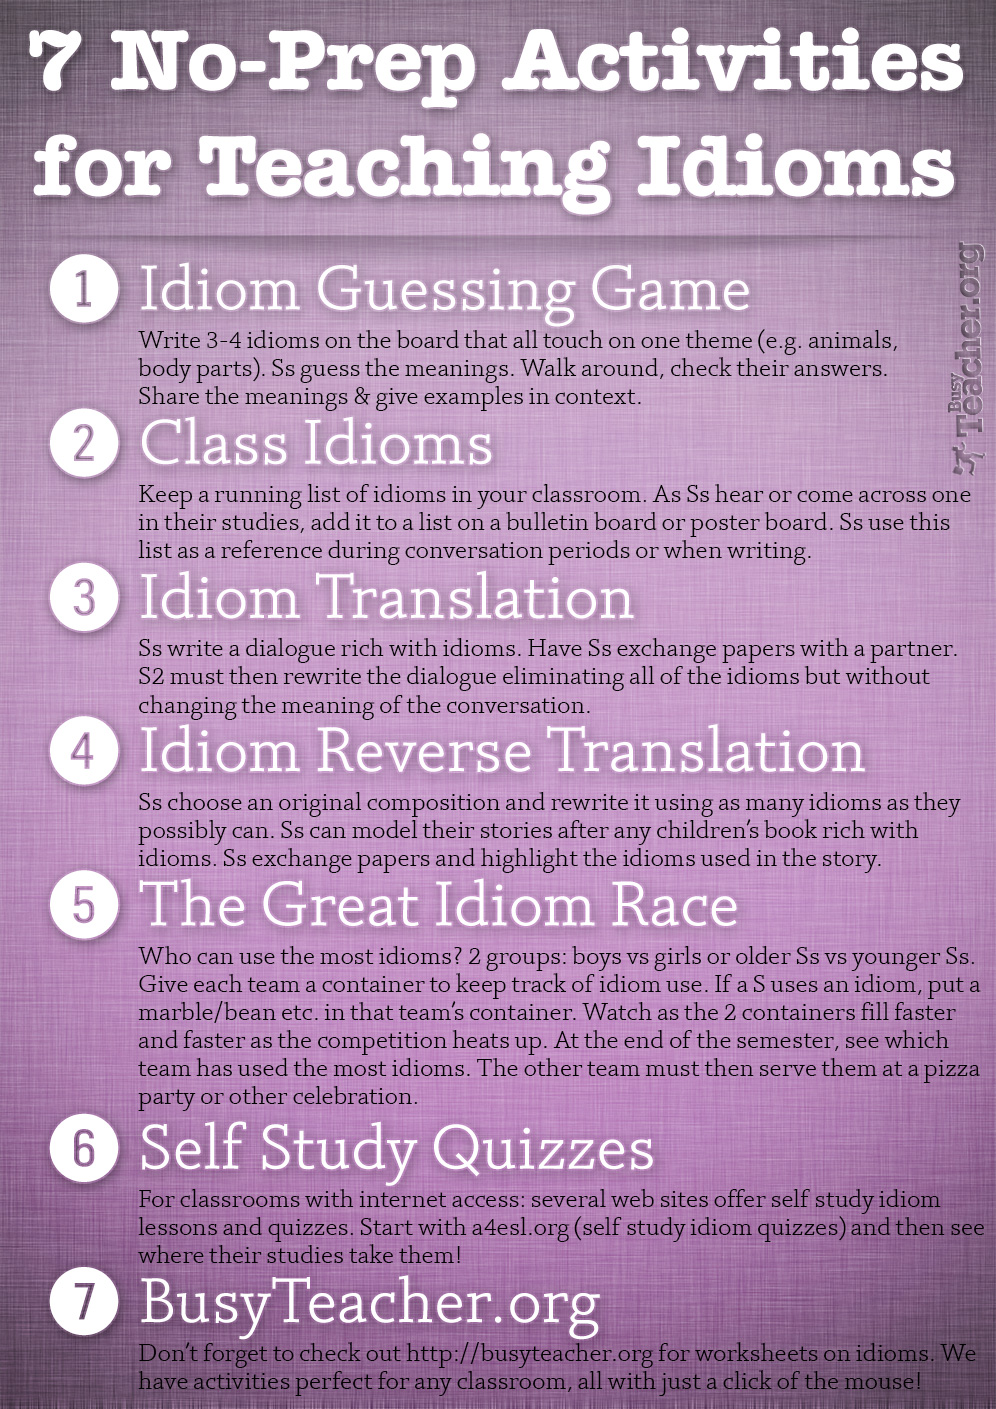 7 No-Prep Activities for Teaching Idioms: Poster